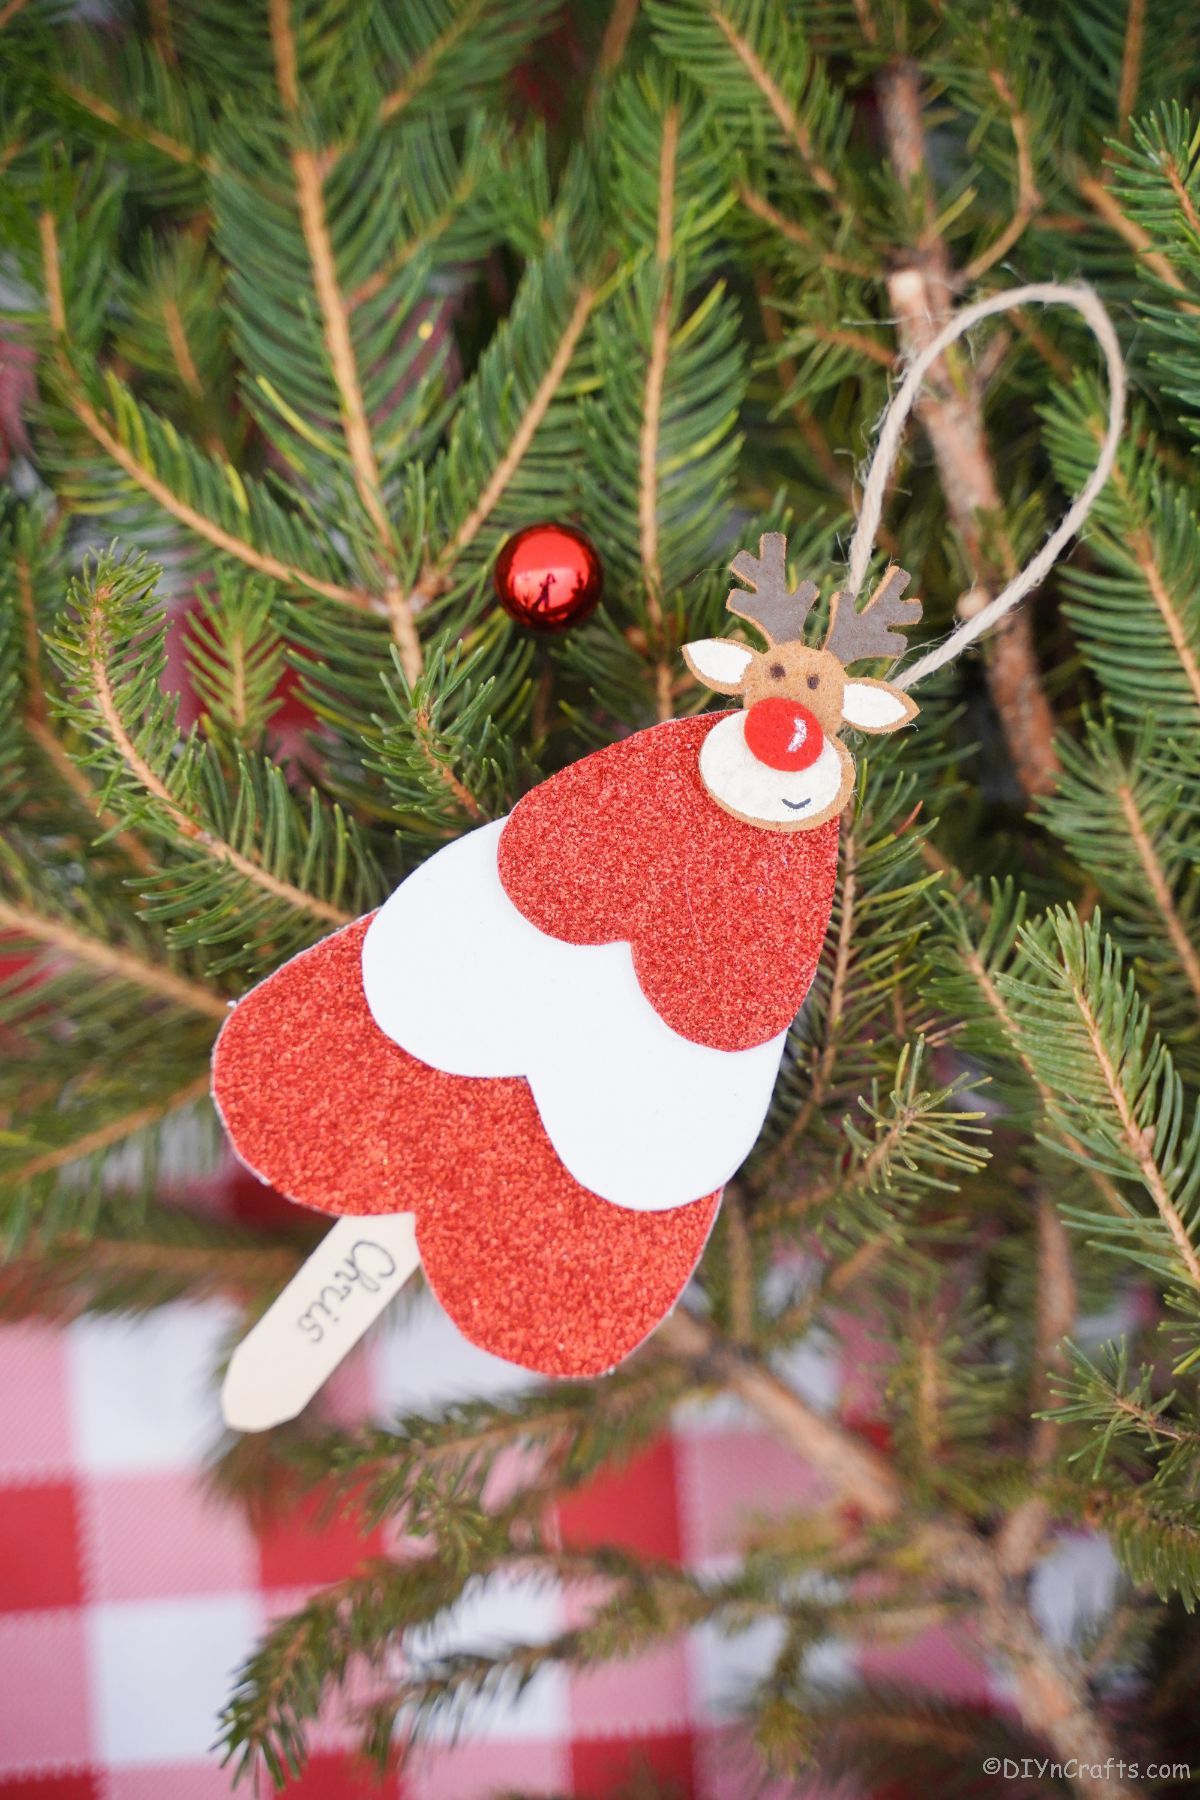 red and white tree shaped ornament on christmas greenery